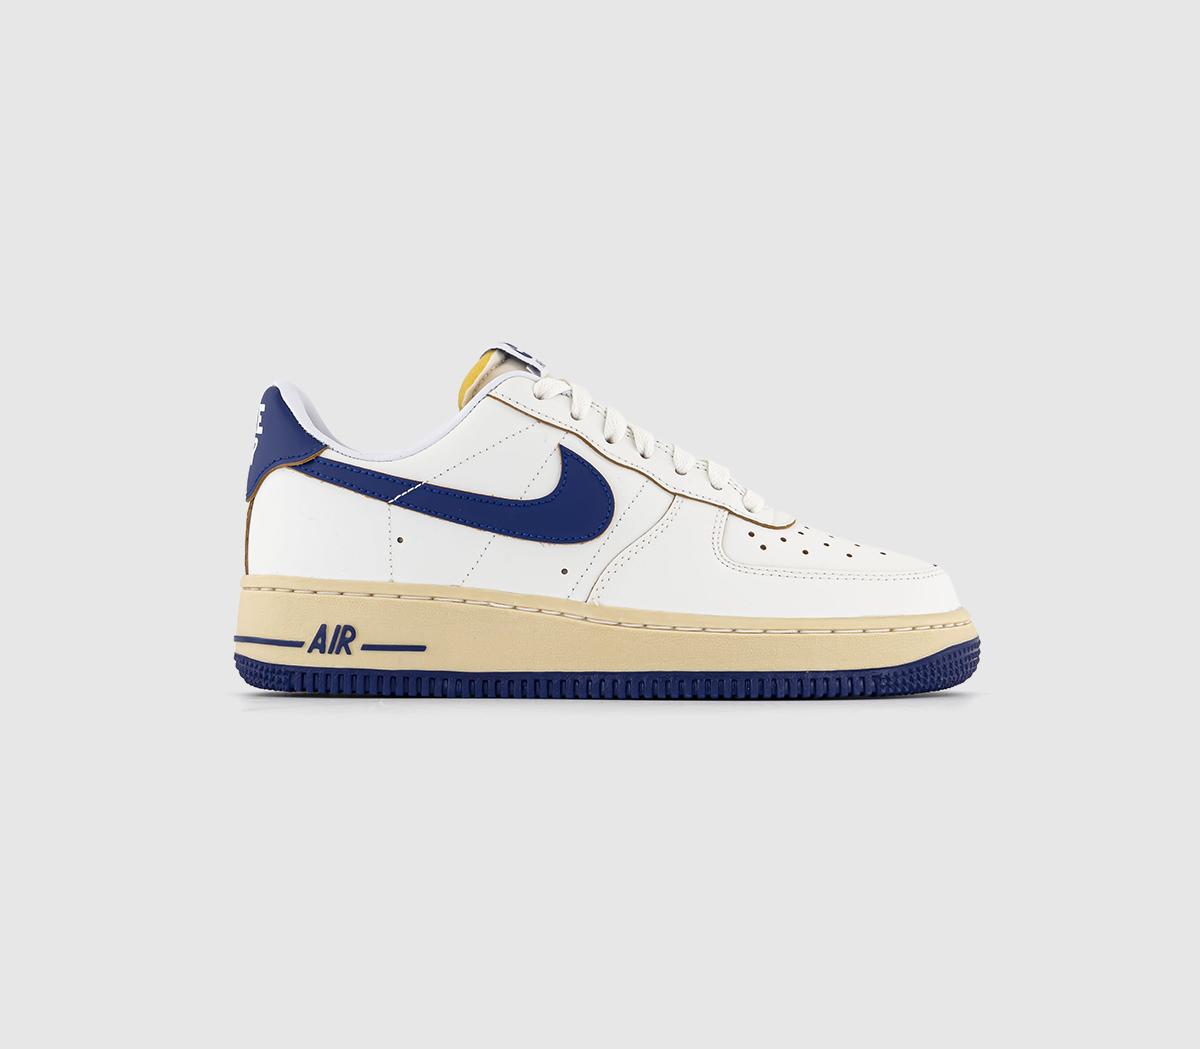 NikeAir Force 1 07 TrainersSail Deep Royal Blue Pale Vanilla Gold Suede White